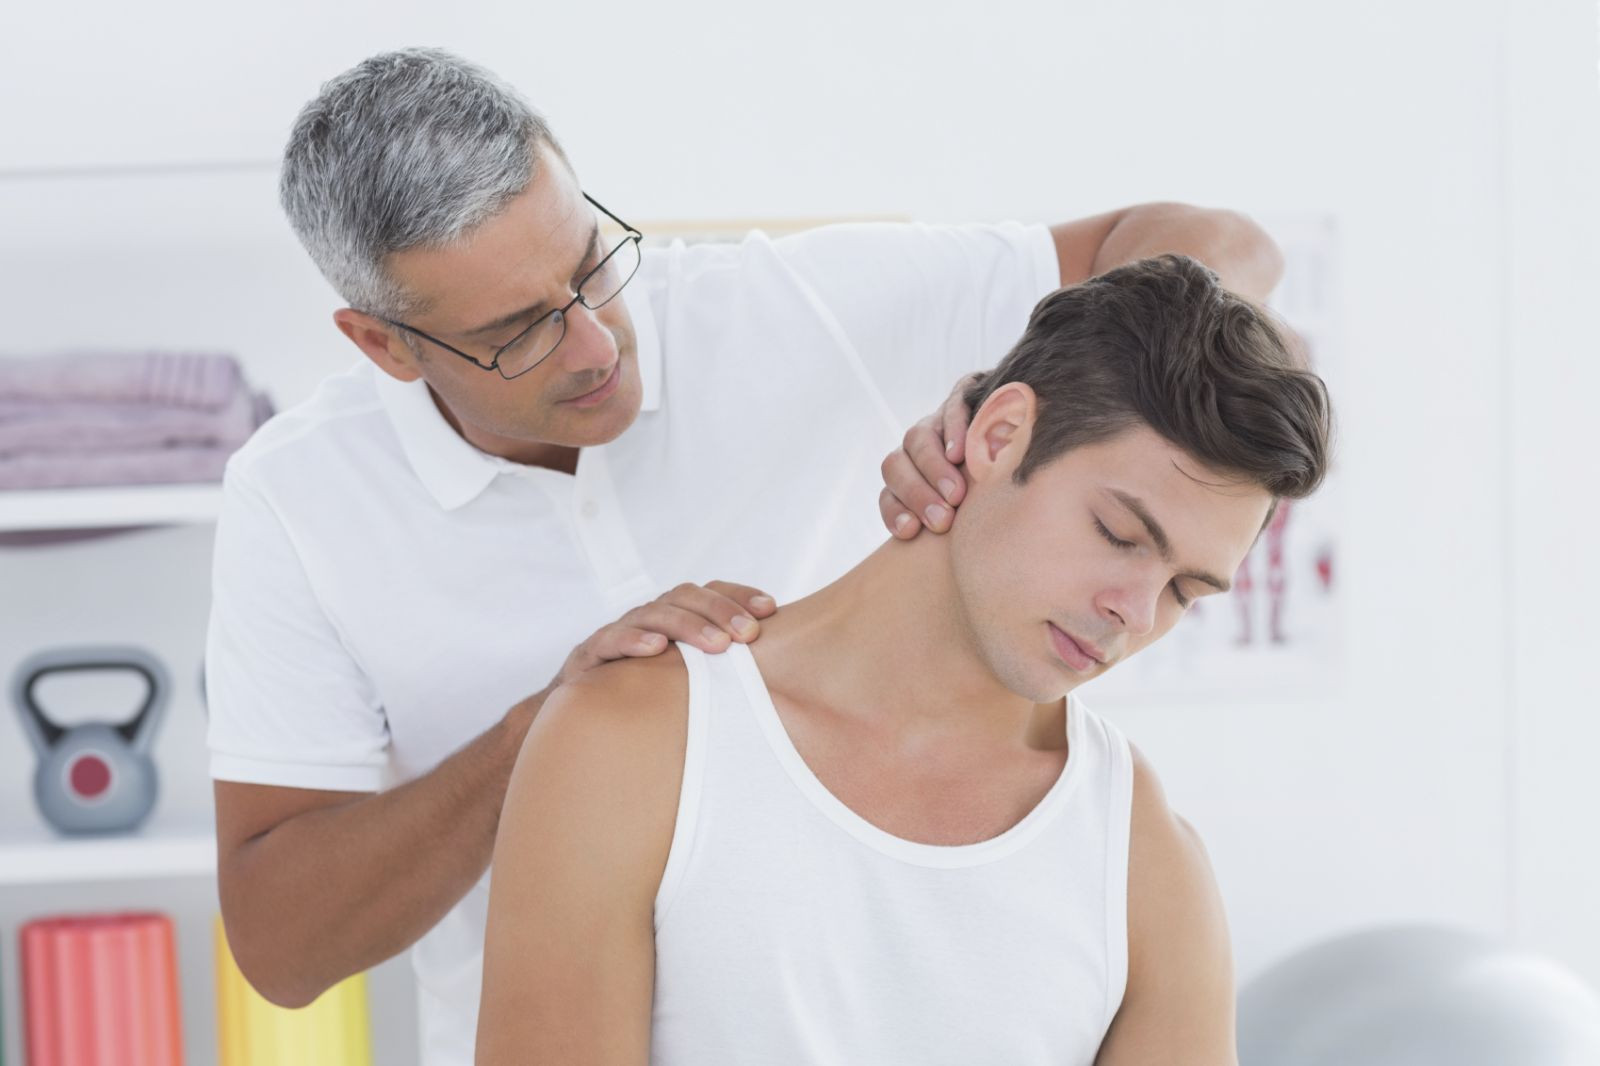 How to Cope With Neck Pain